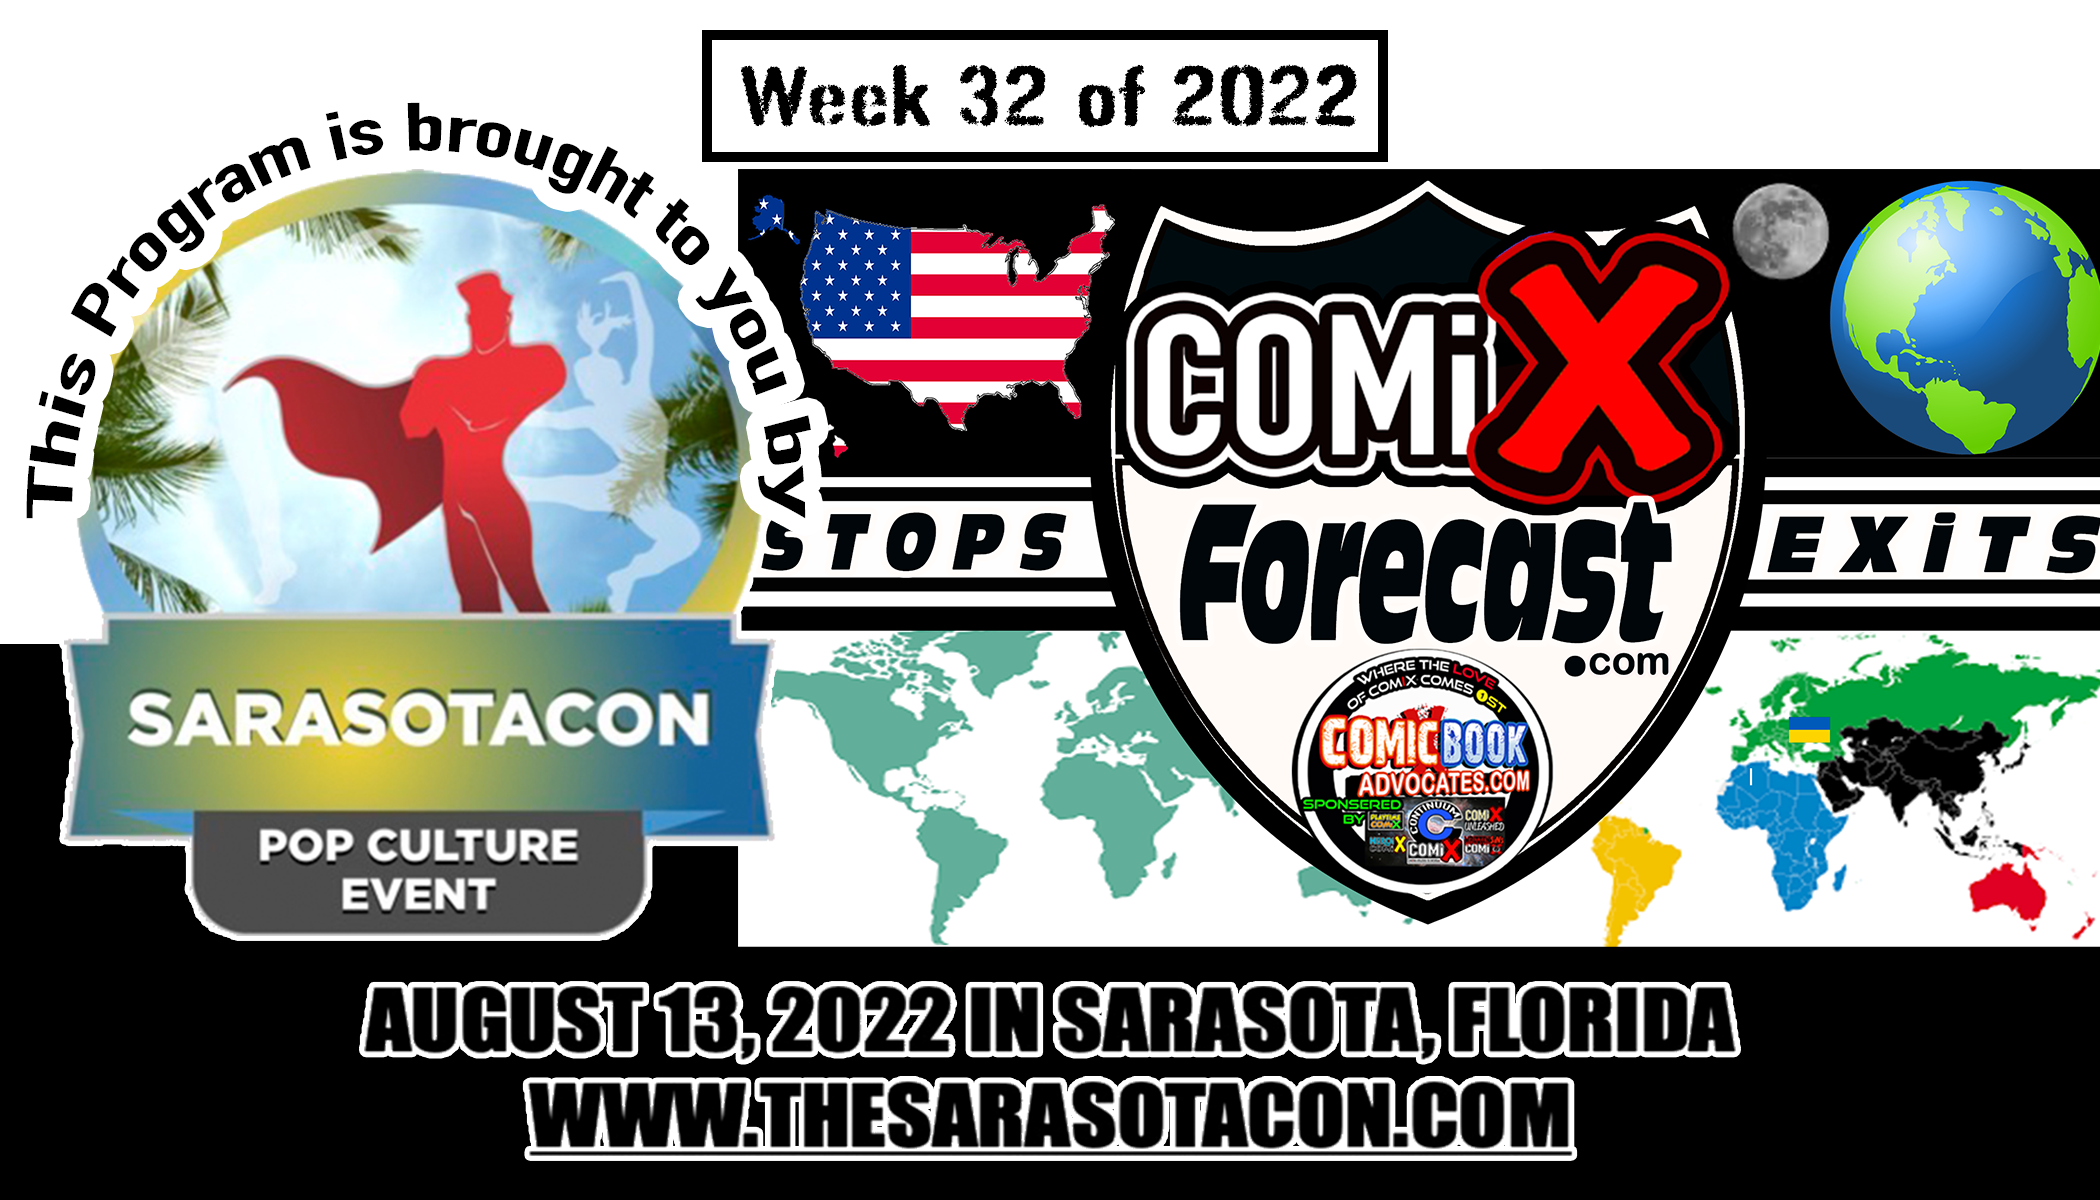 A SUMMER SARASOTA FORCAST for week 32 of 22 the COMiX FORECAST